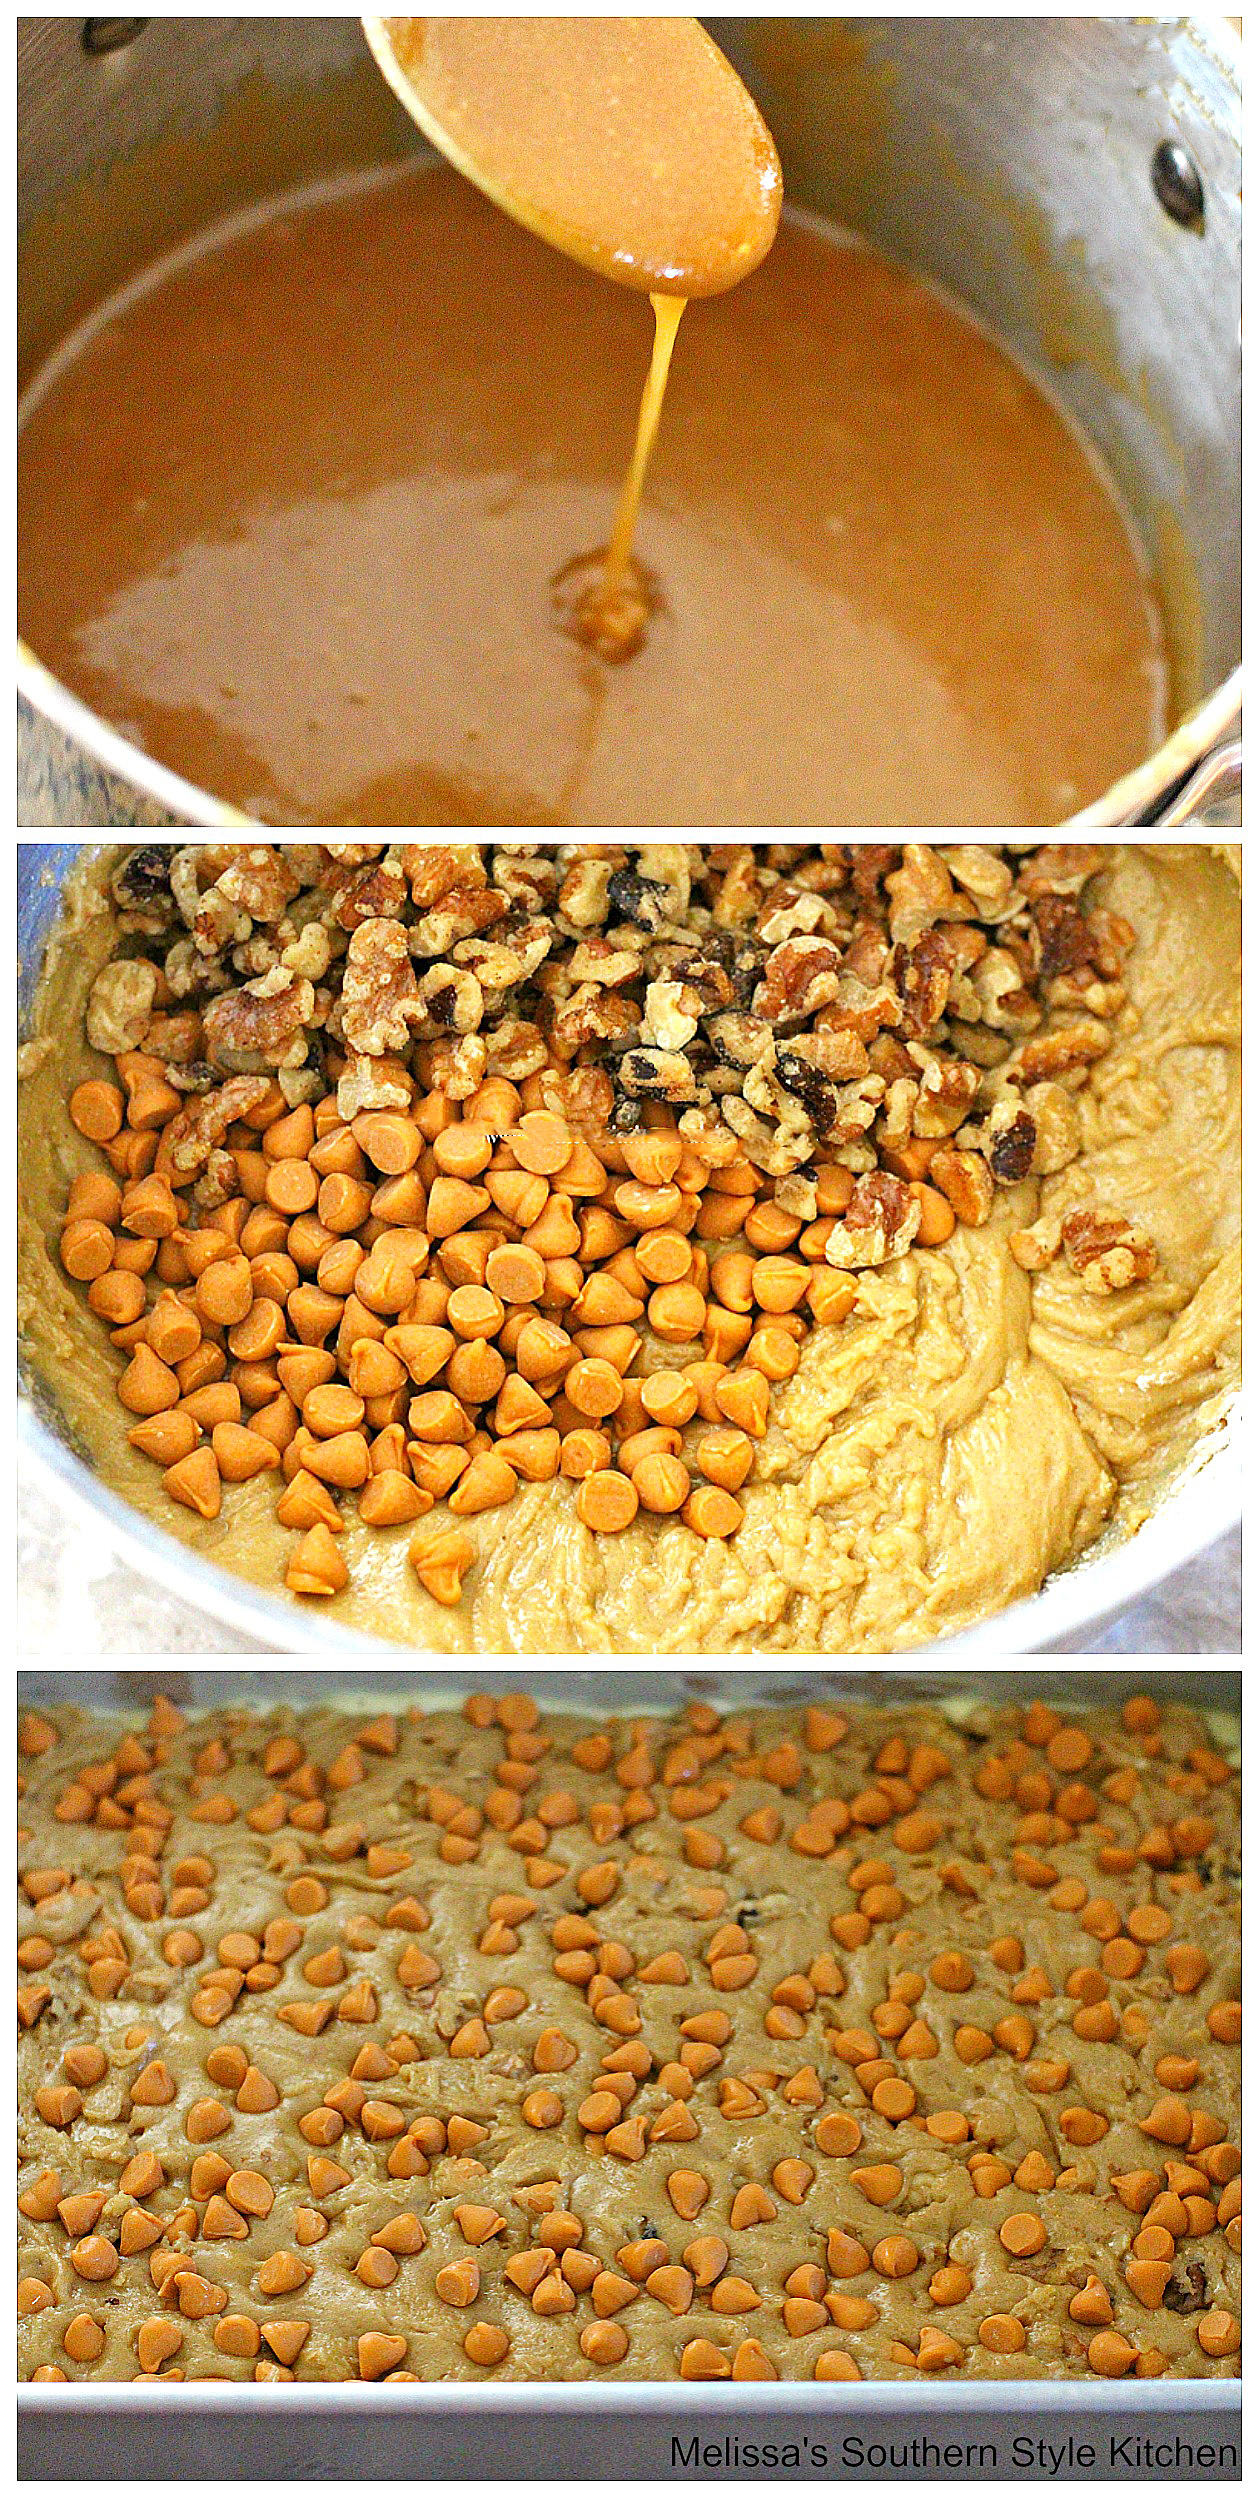 Step-by-step images of preparation of Butterscotch Brownies